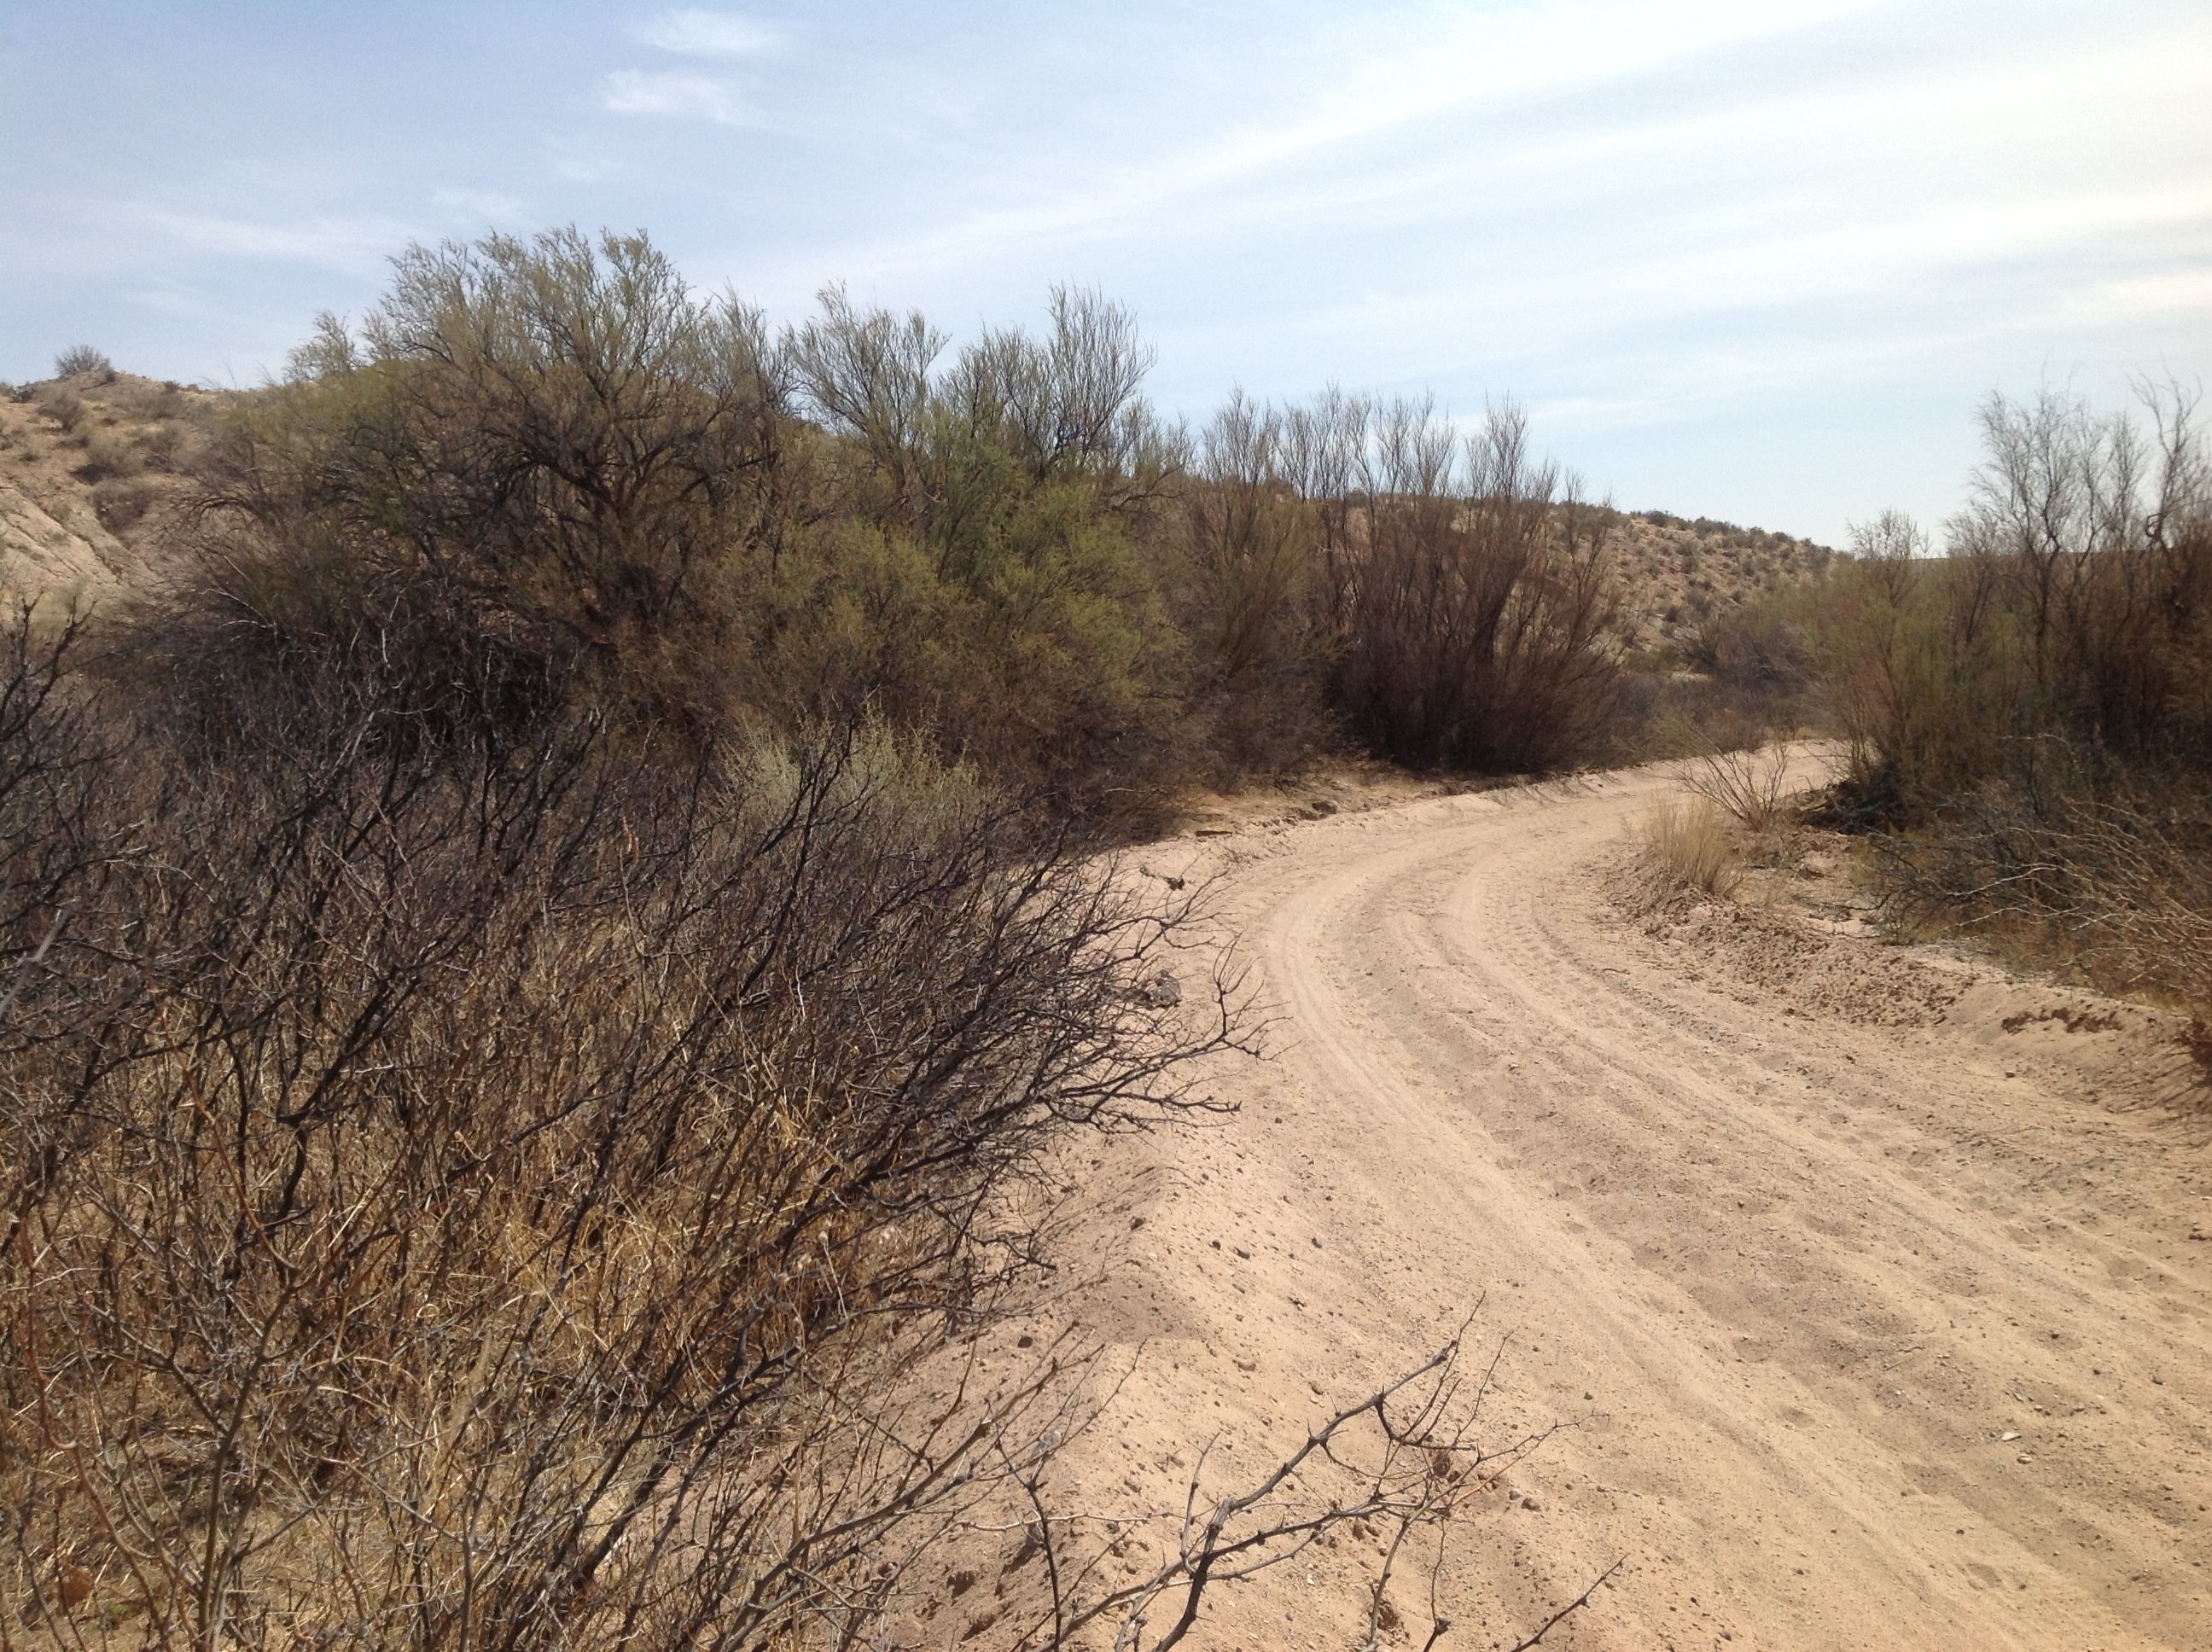 A dry dusty road at at Bosque del Apache National Wildlife Refuge at Point of Lands near Socorro, NM